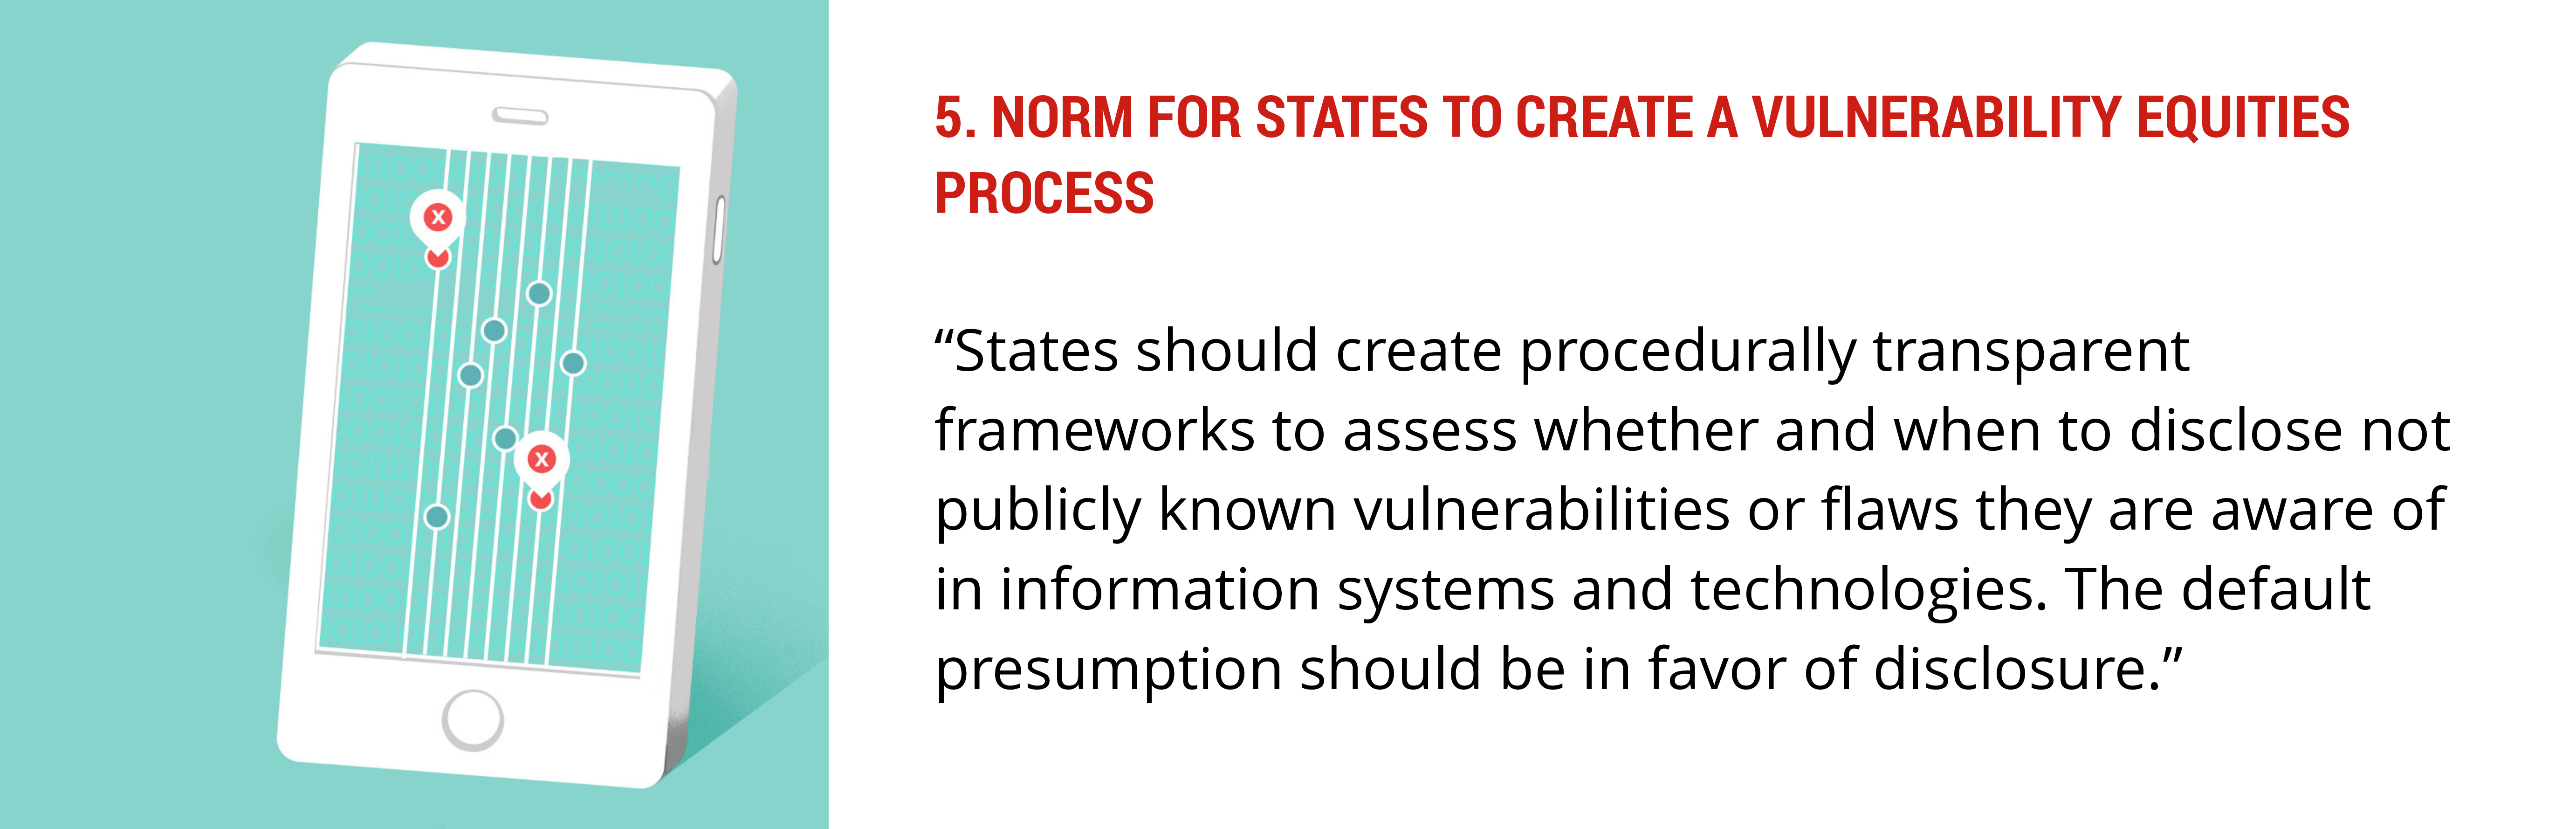 Norm for States to Create a Vulnerabilities Equities Process 